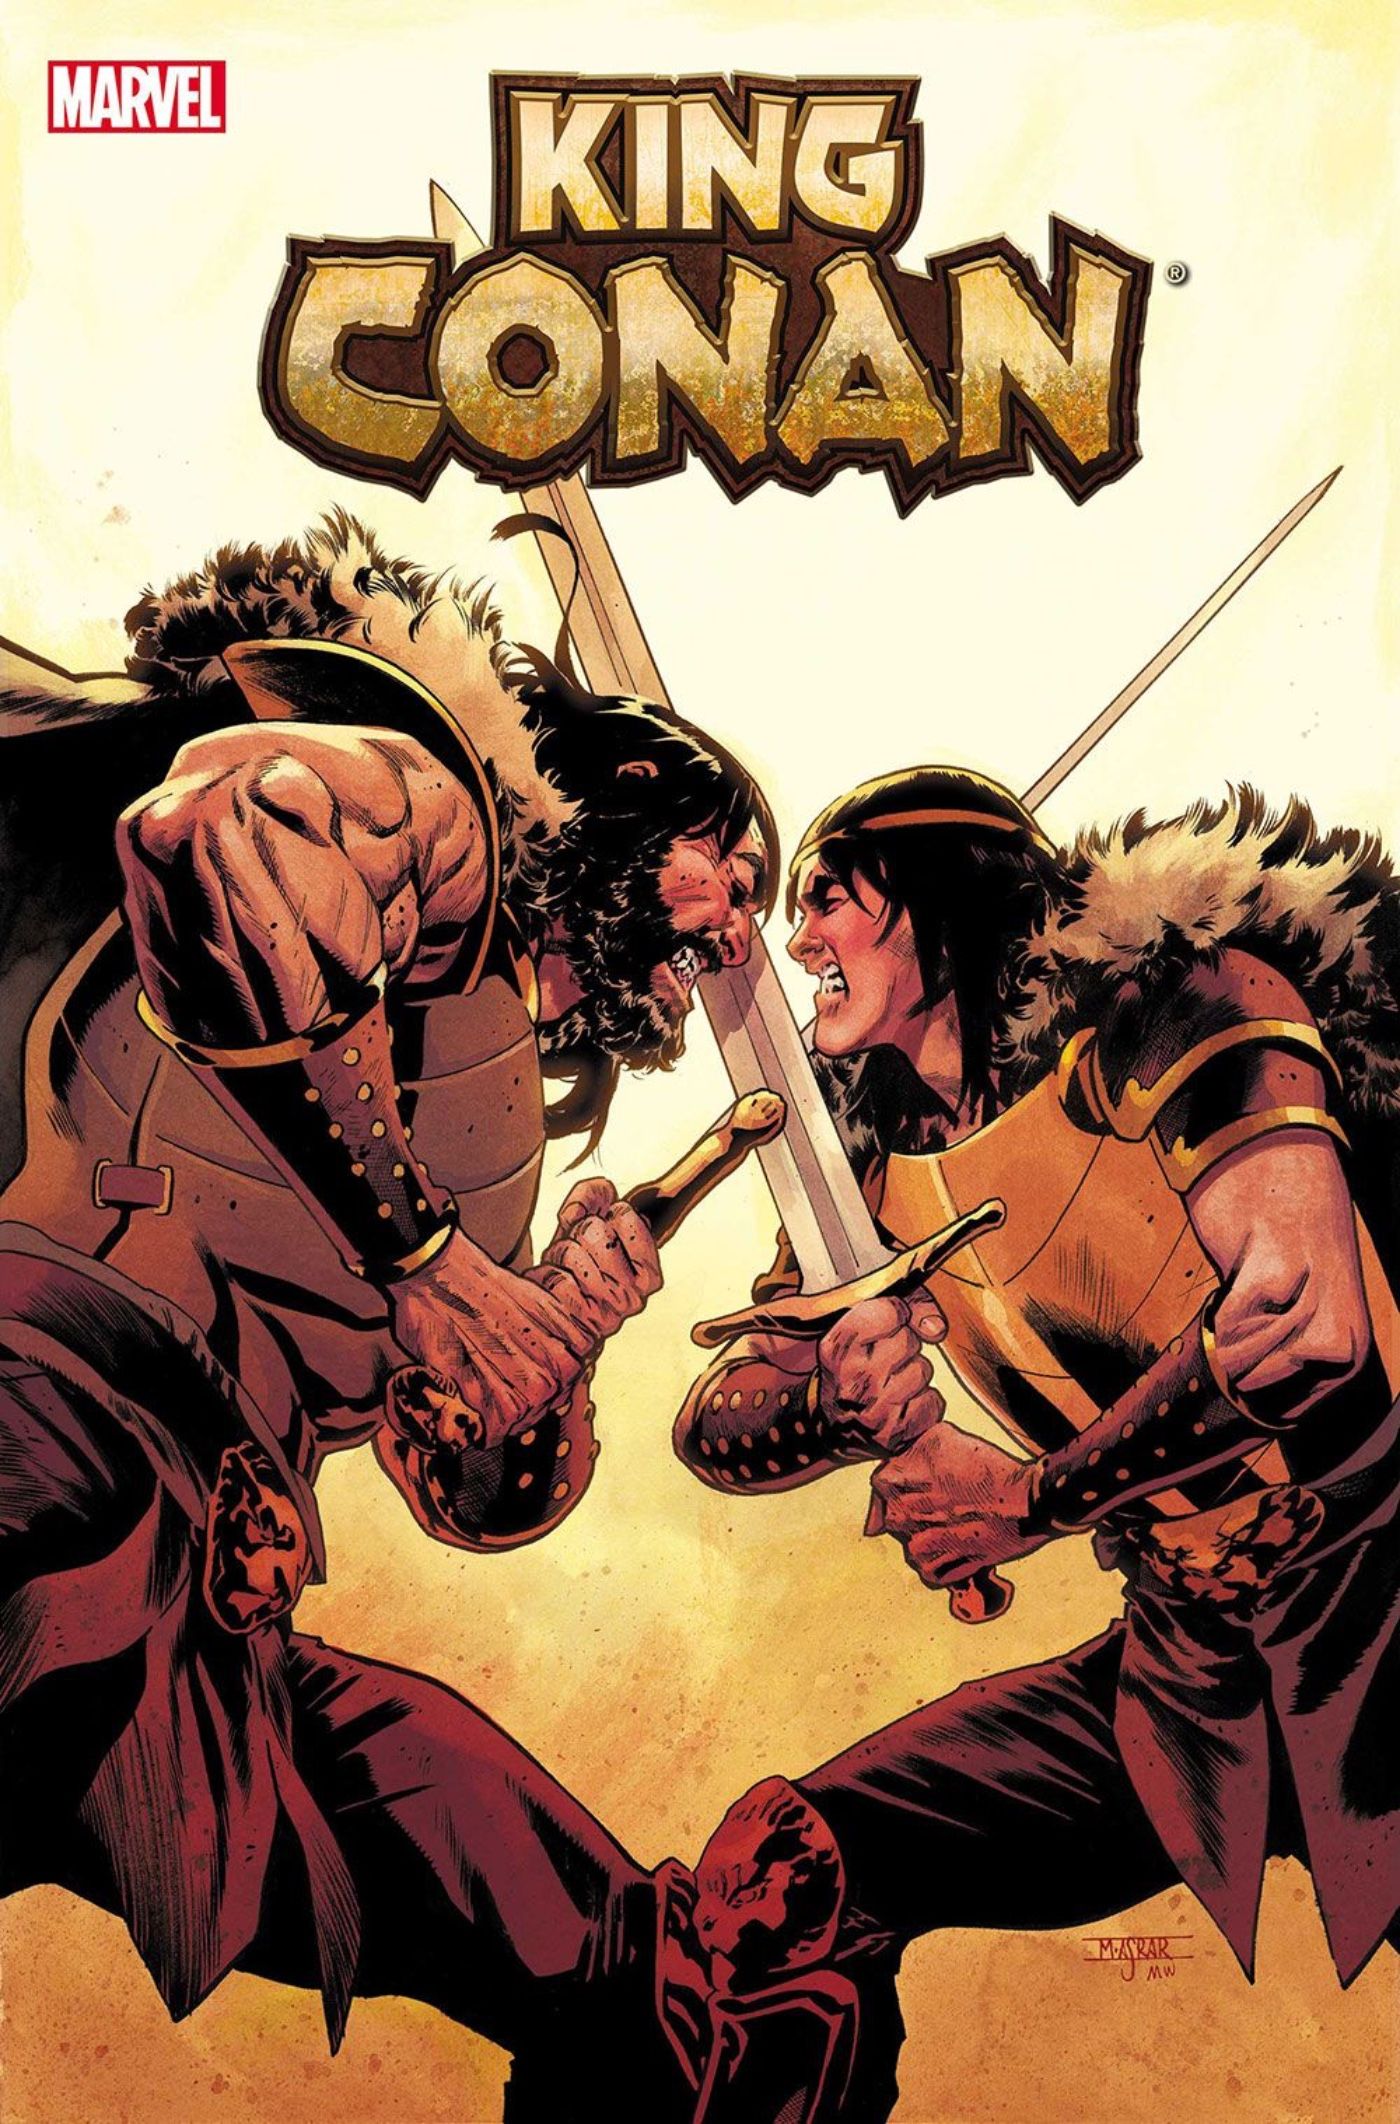 King Conan 4 cover, showing Conan fighting his Conn. Their swords are locked in combat